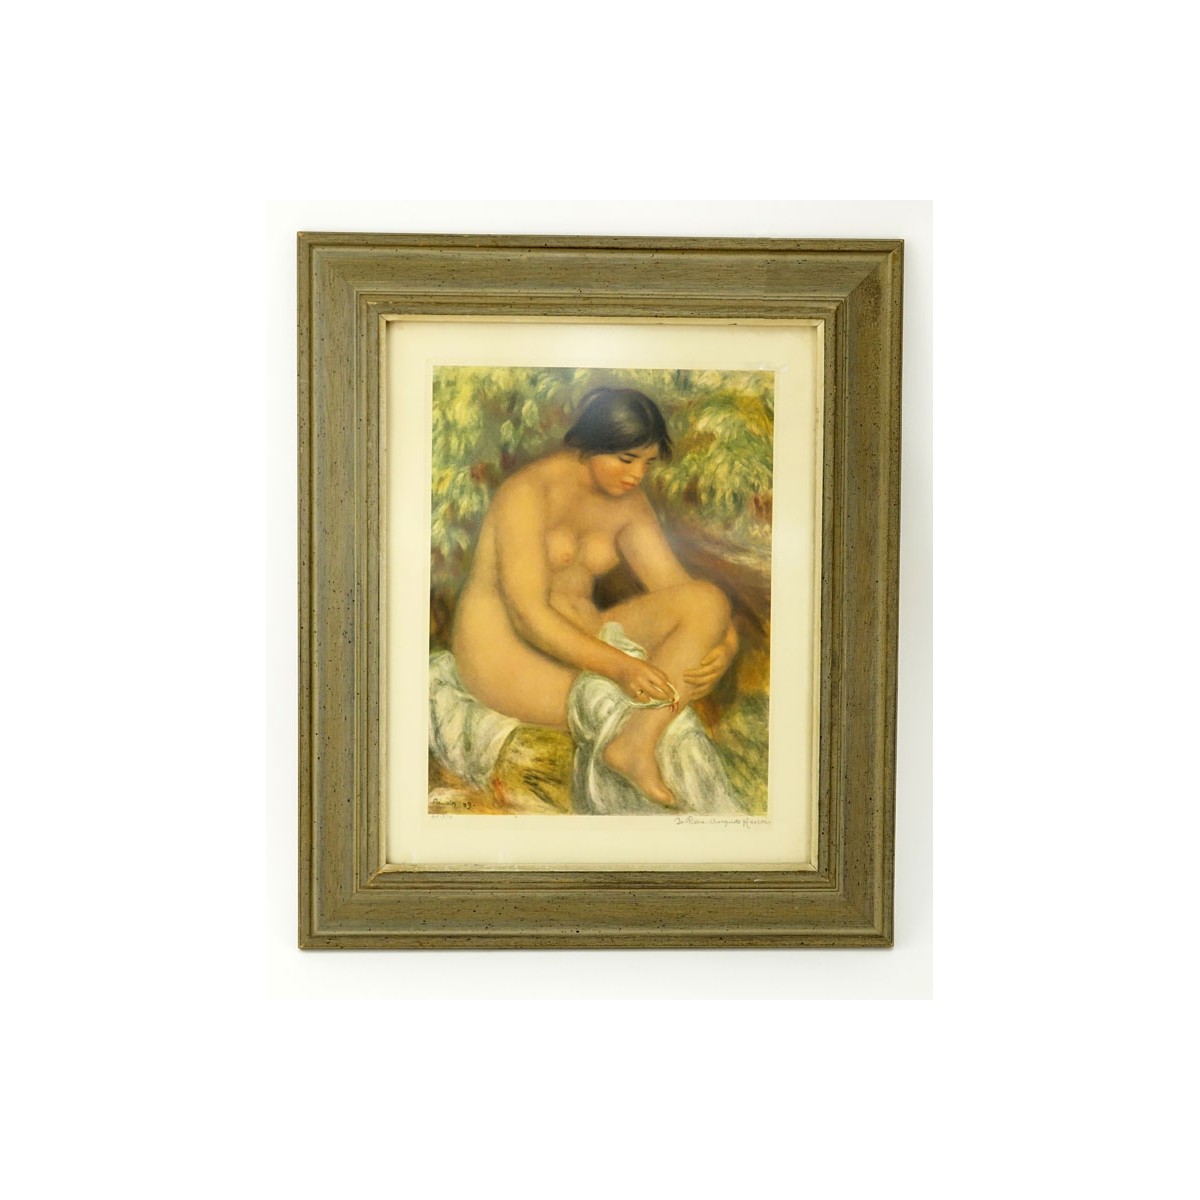 After: Pierre Renoir, French  (1841-1919) "Bather 